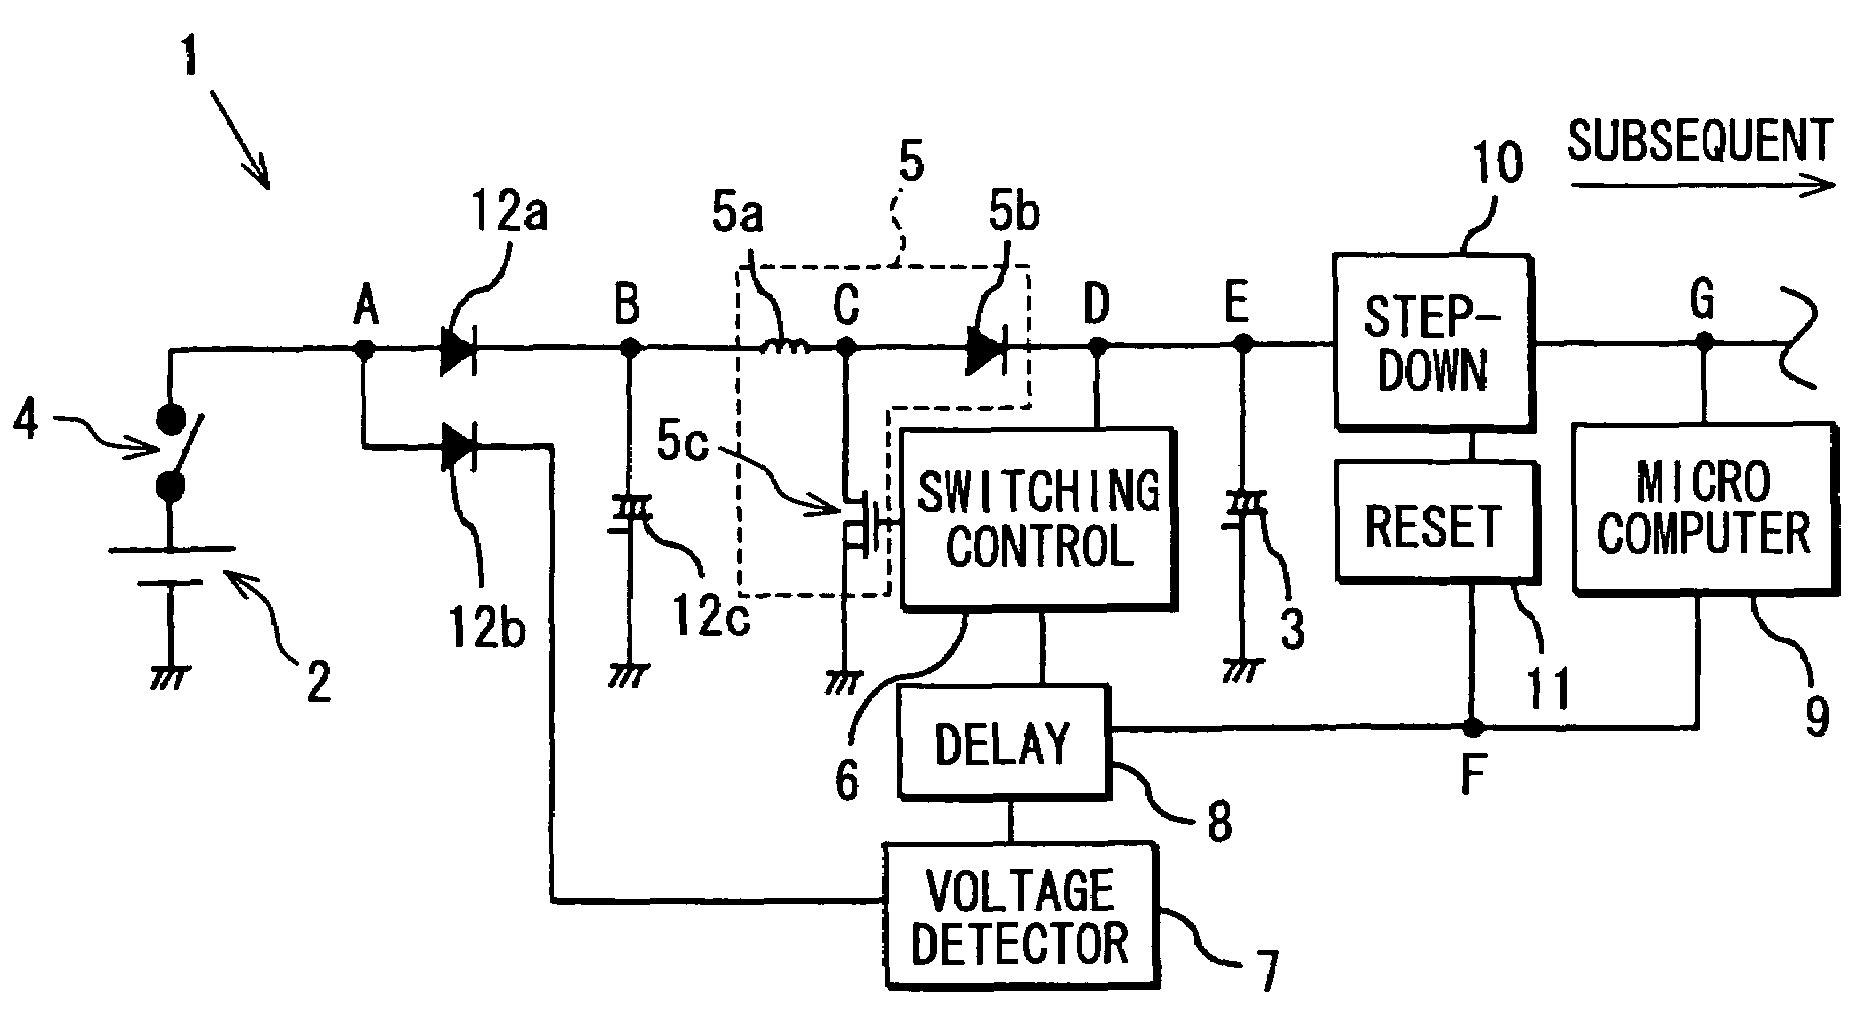 Switching booster power circuit